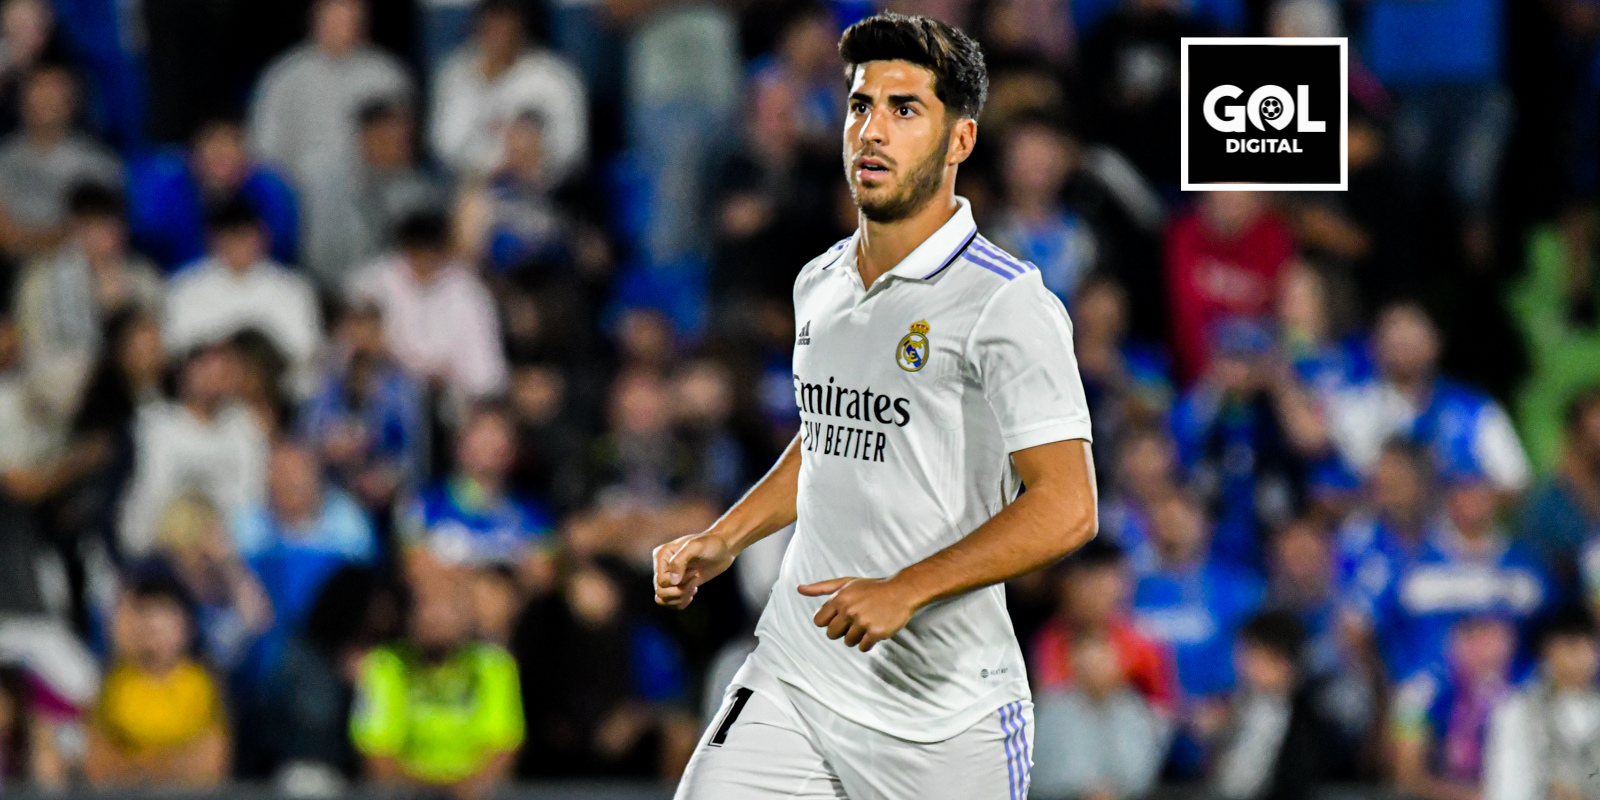 Real Madrid reacts to the imminent signing of Asensio by FC Barcelona
